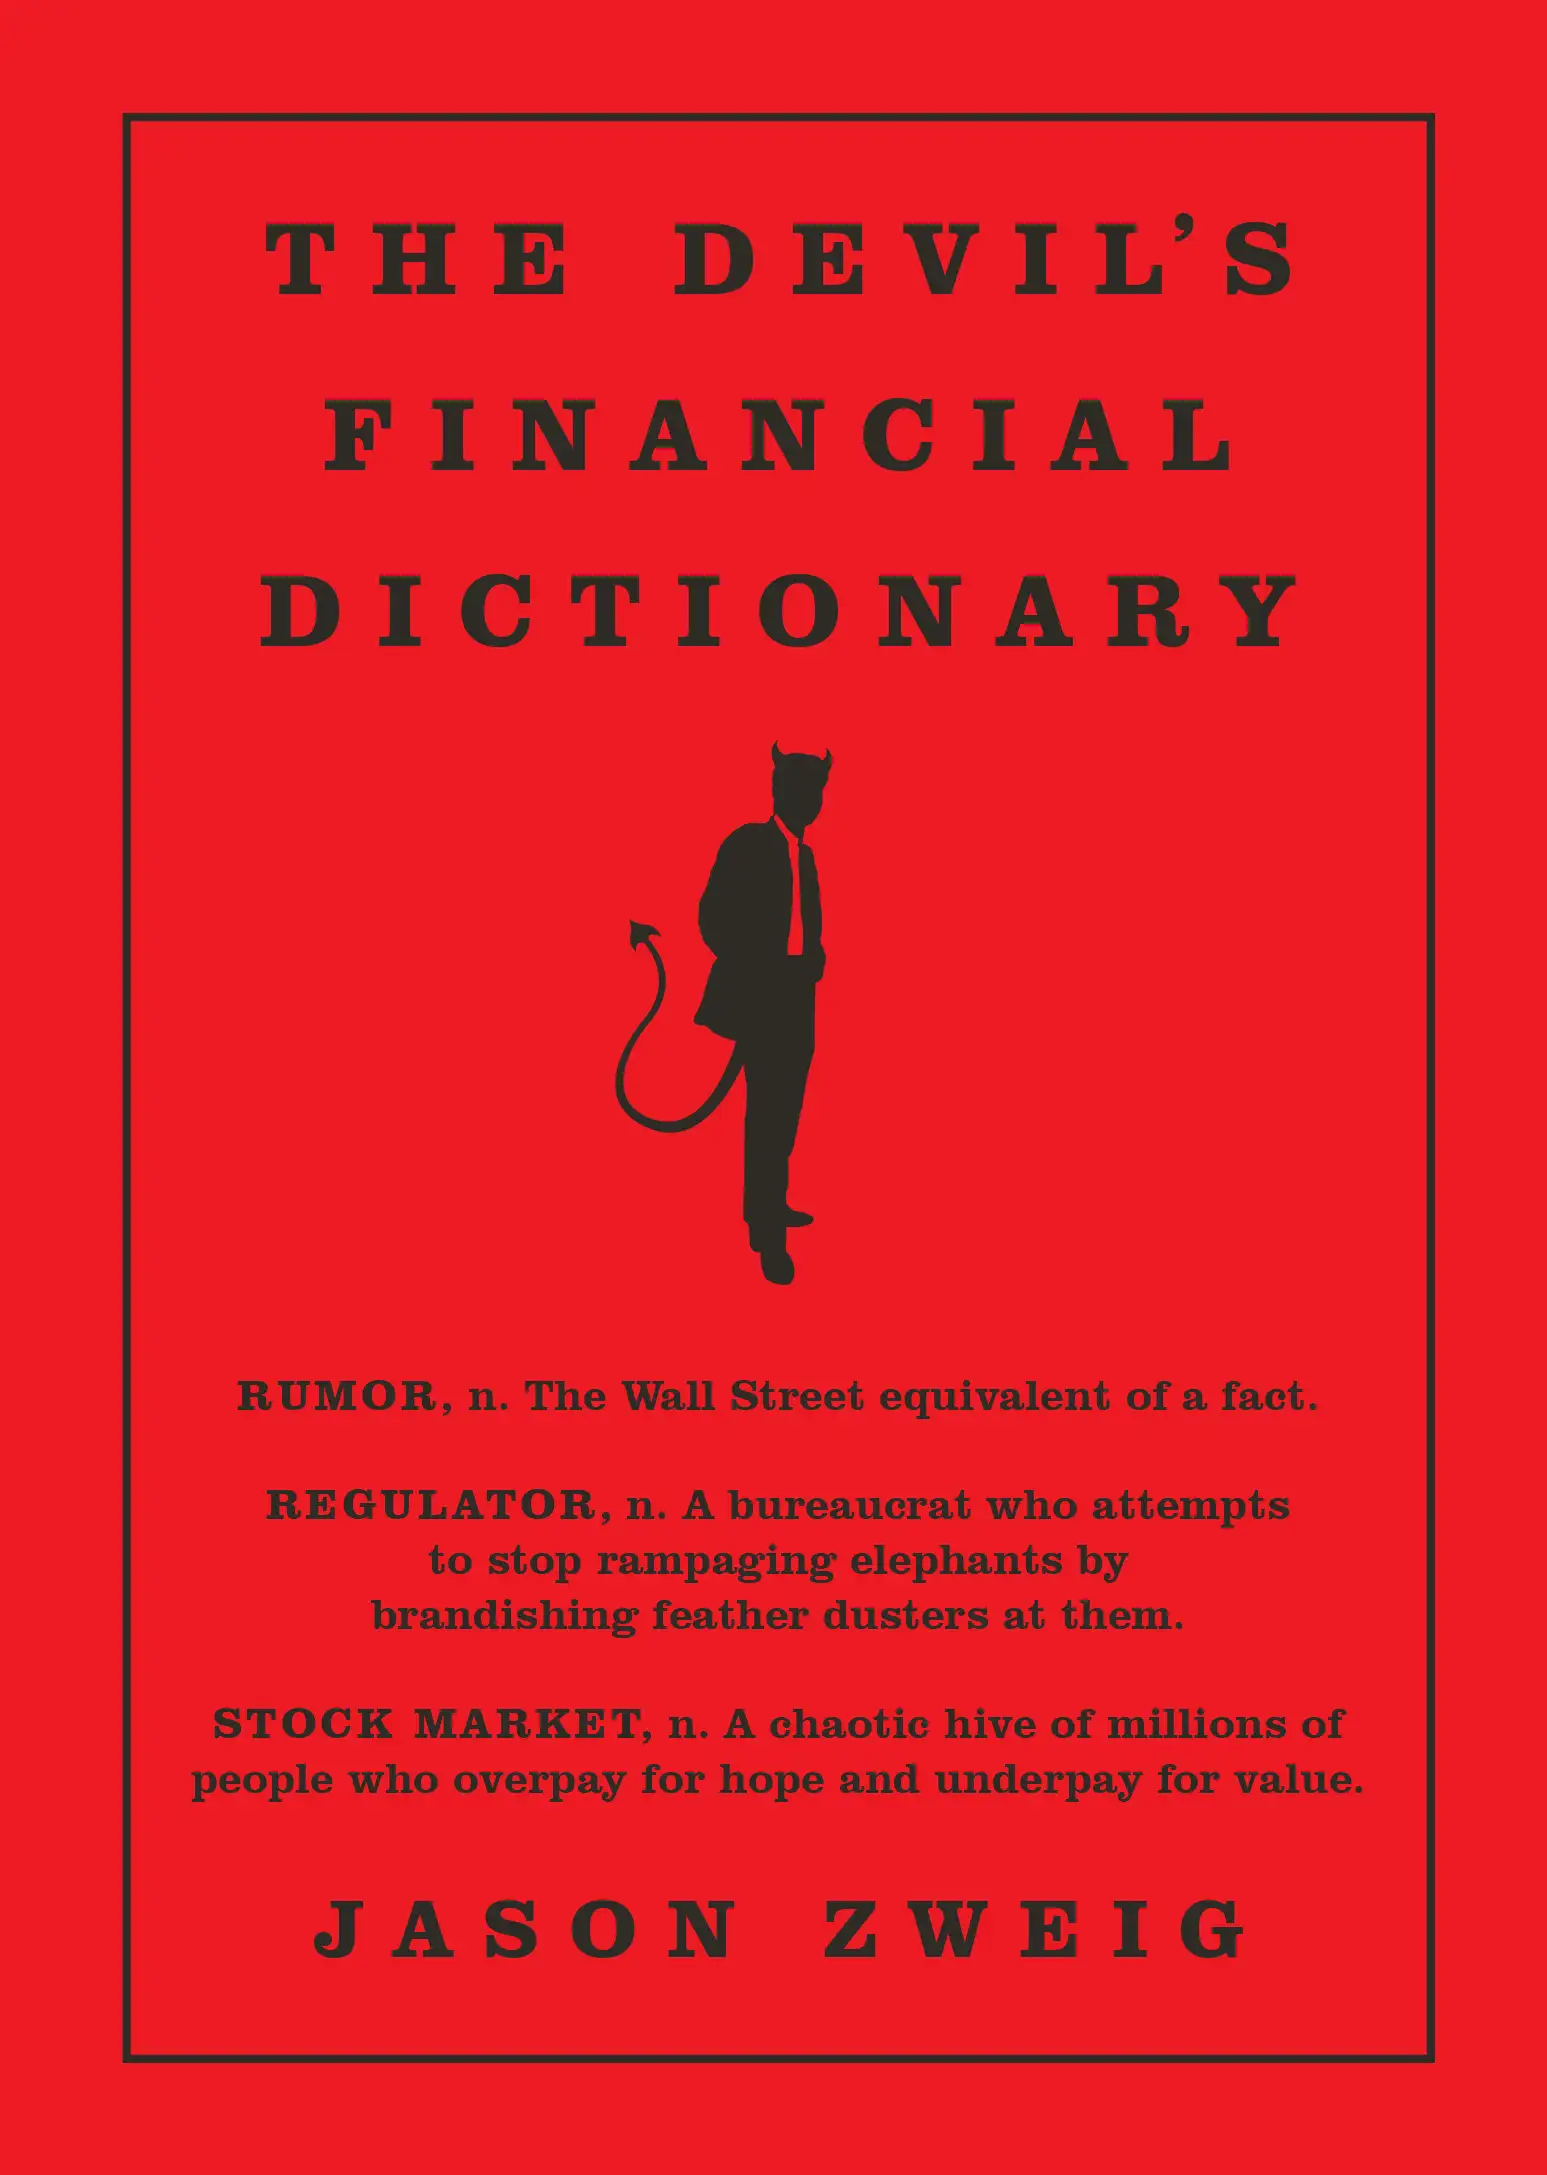 The Devil's Financial Dictionary book cover